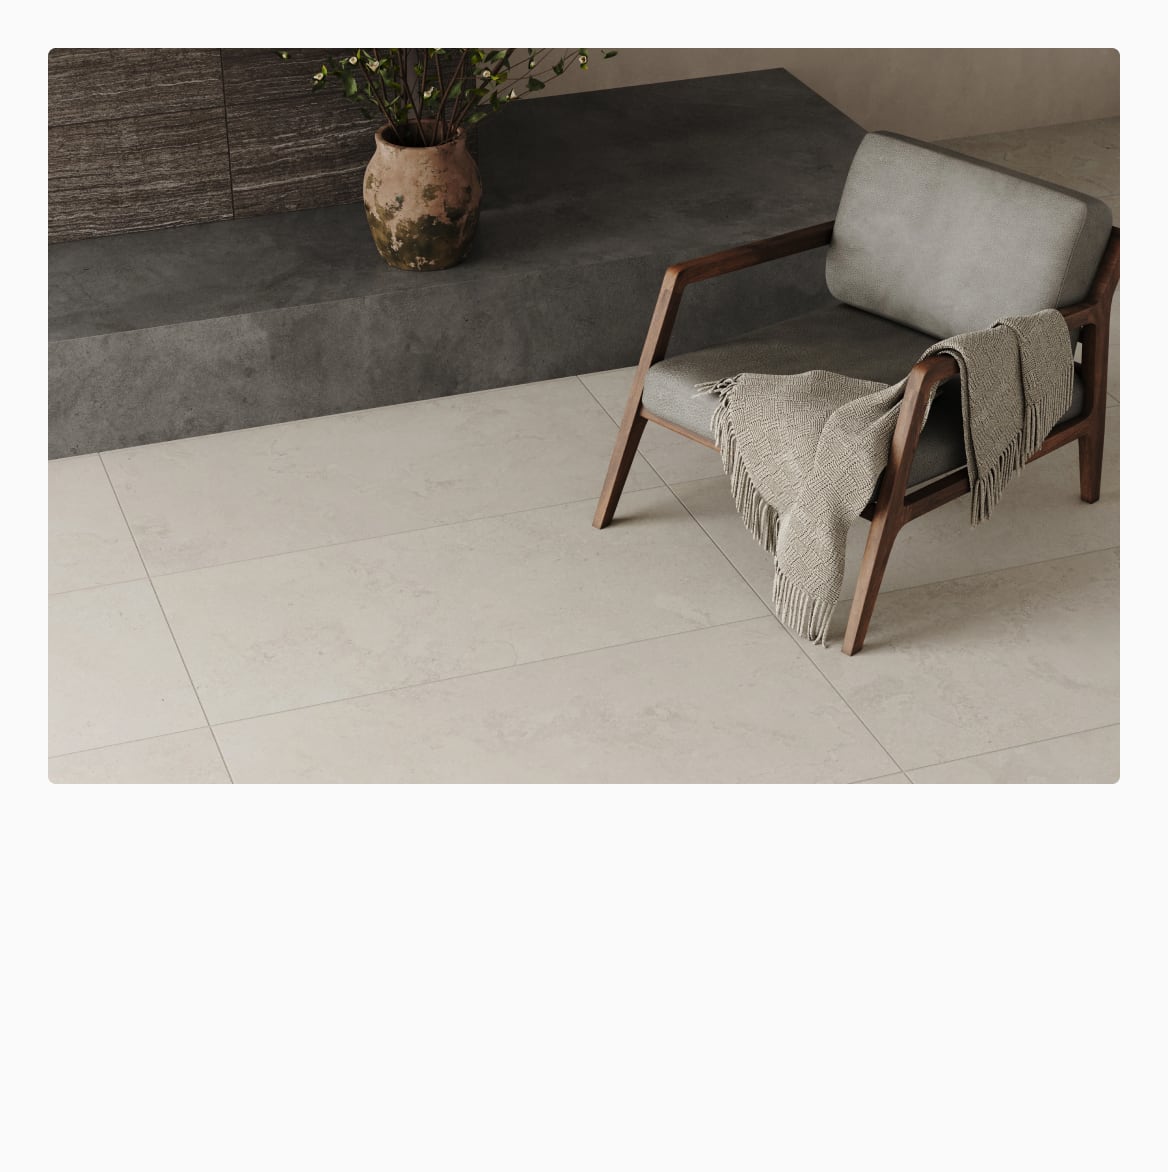 Smooth, light-hued floor tiles grace this minimalist room, offering a serene and spacious ambiance.